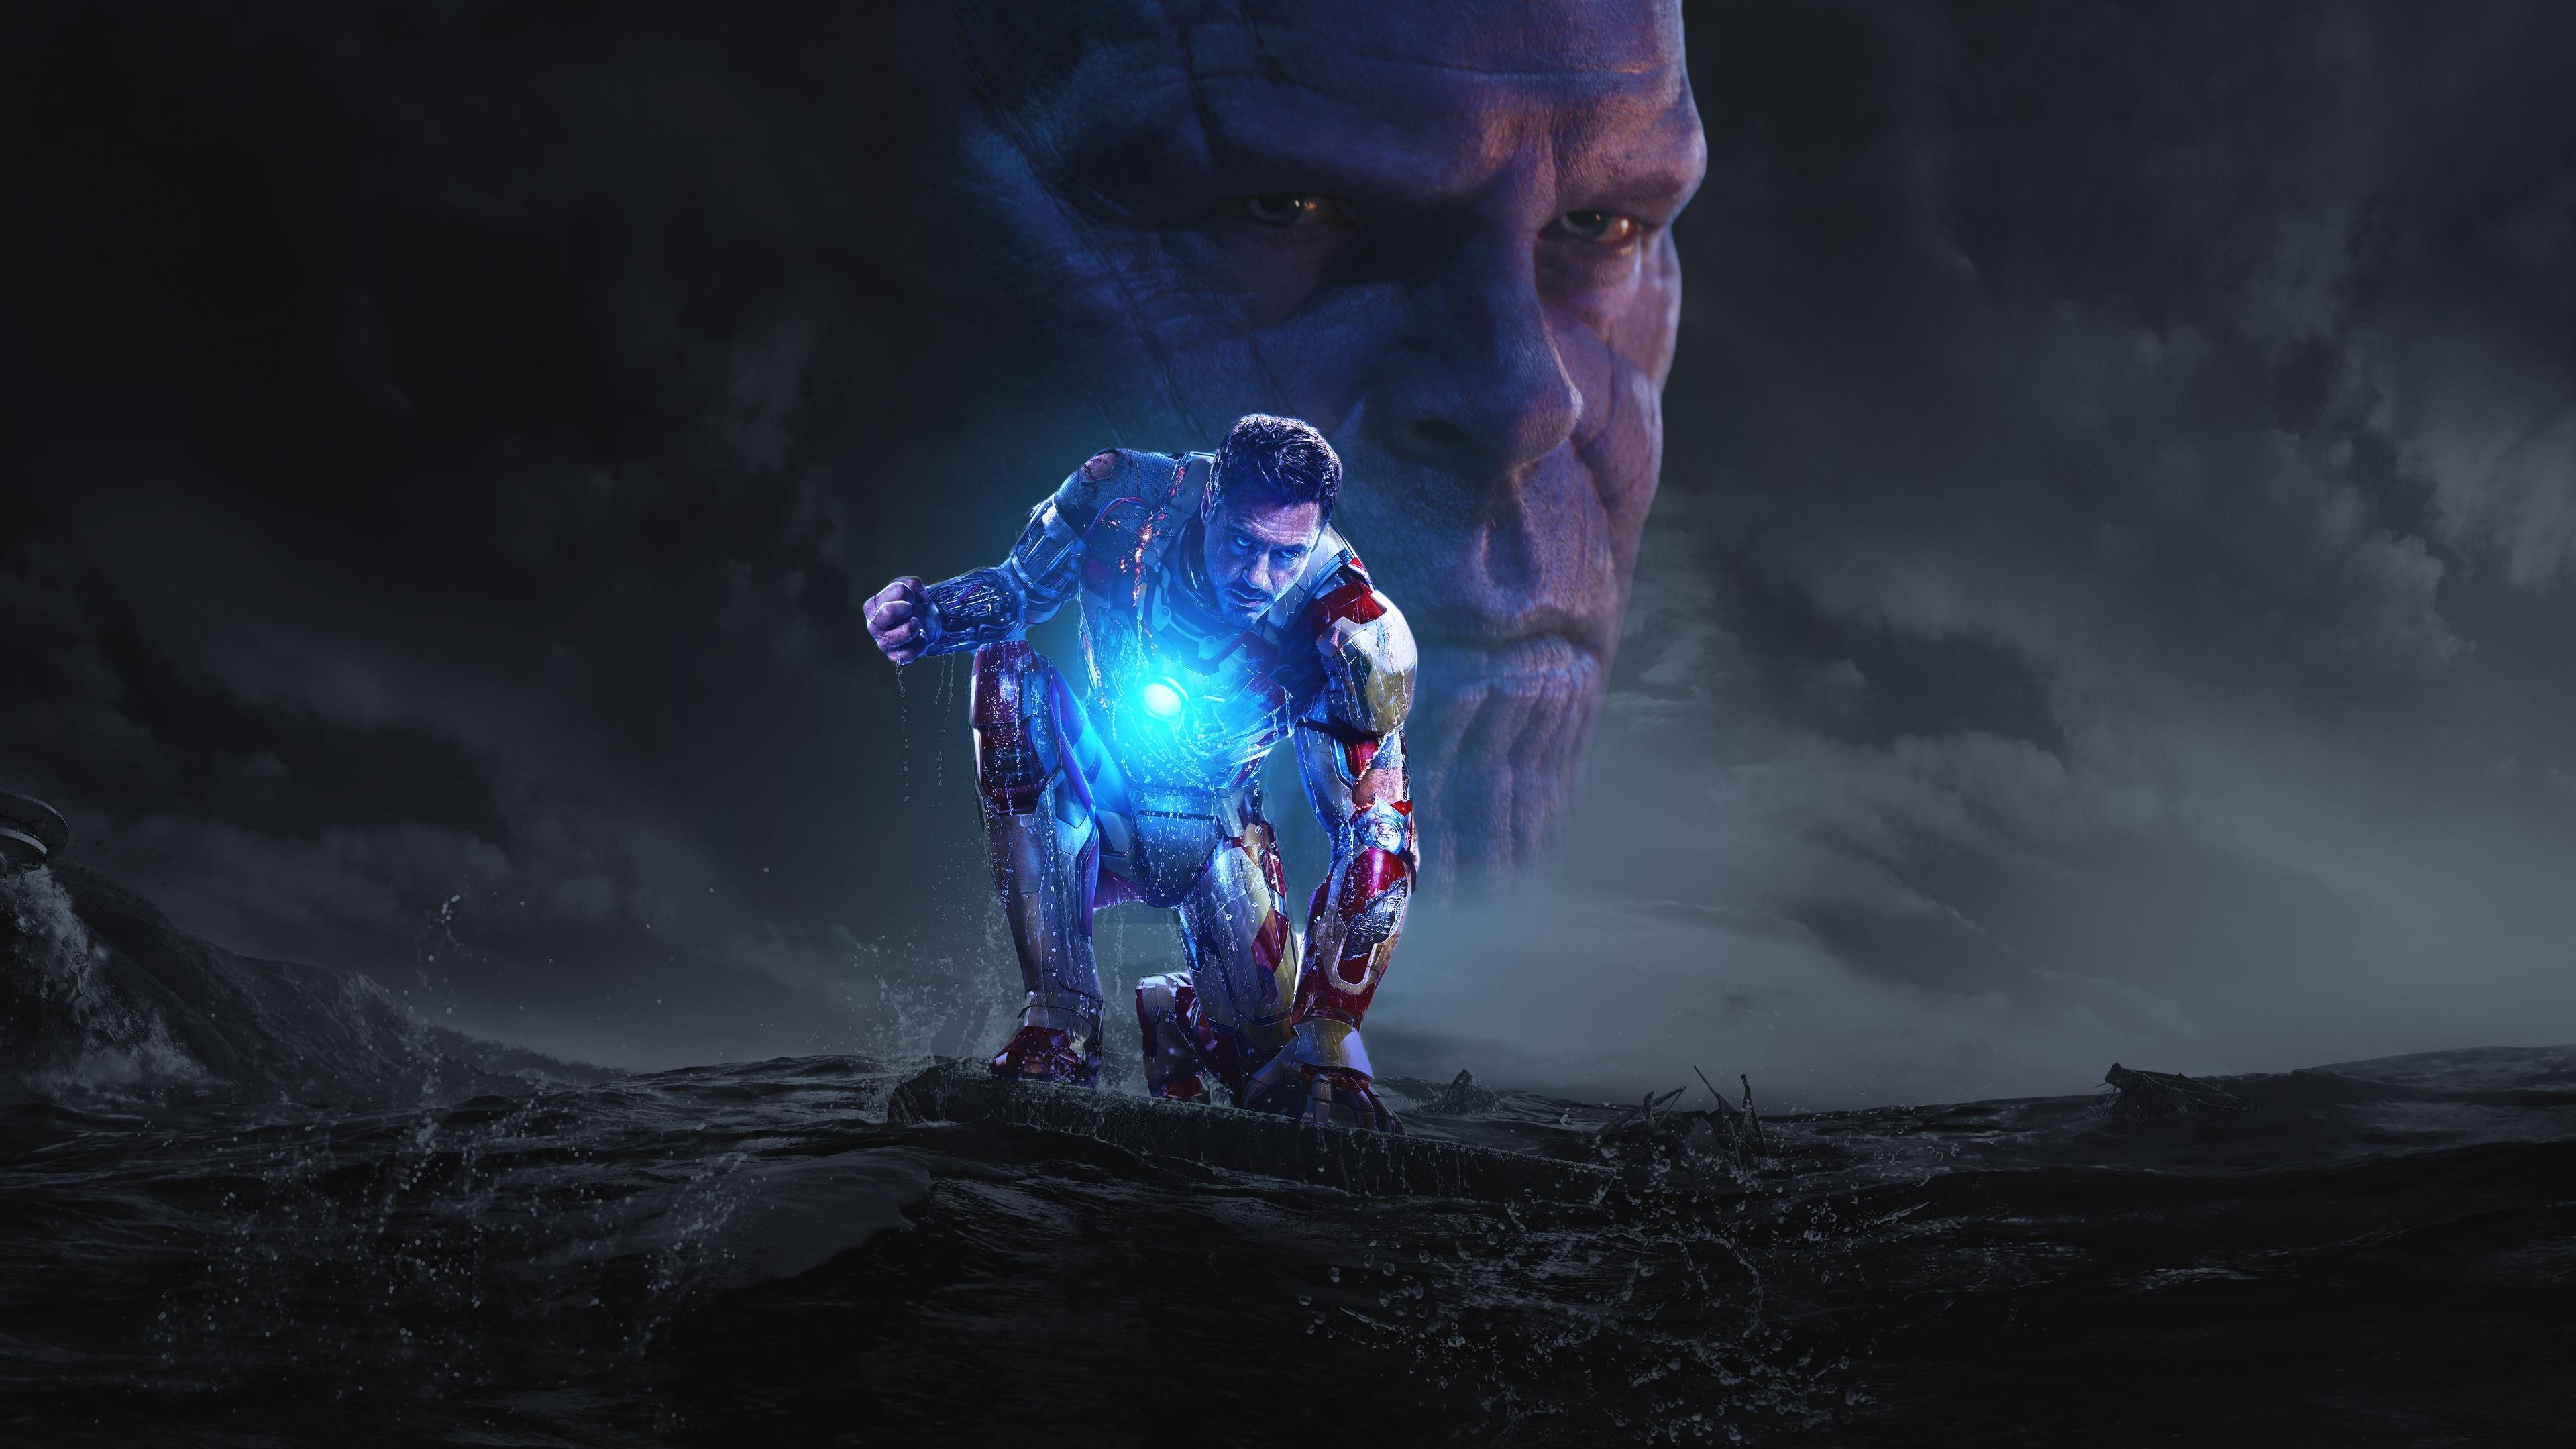 Iron Man and Thanos 4k Ultra HD Wallpaper. Background Image